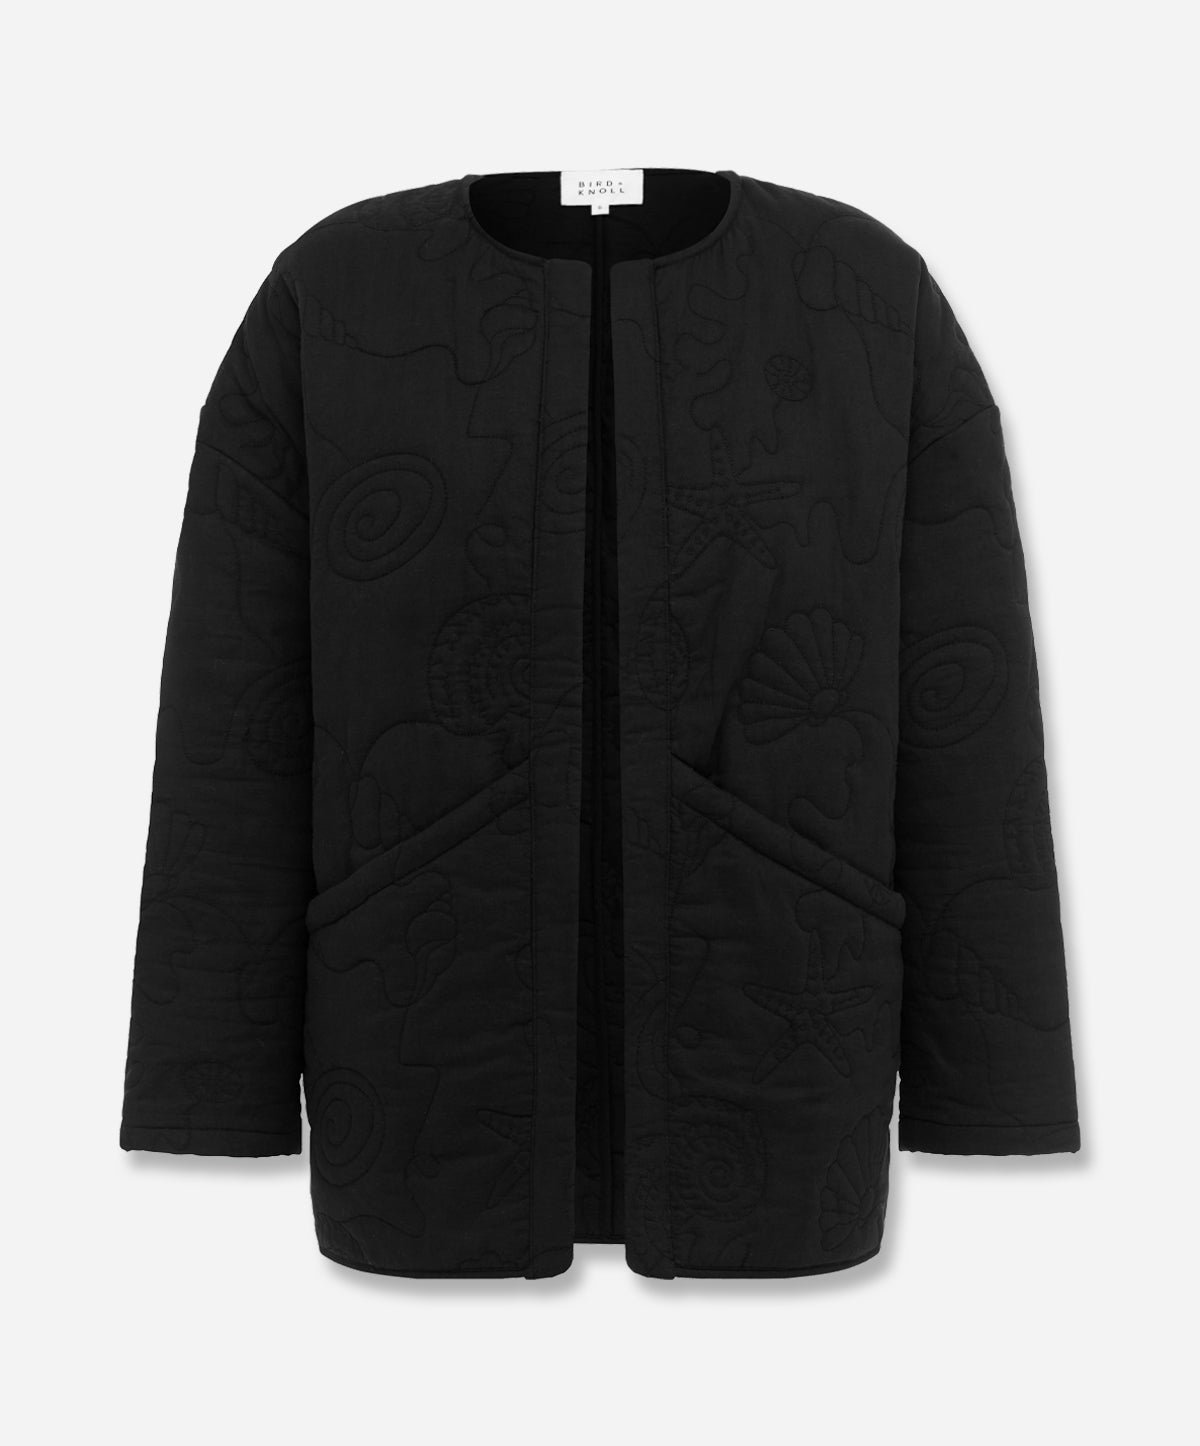 Lorenzo Quilted Jacket